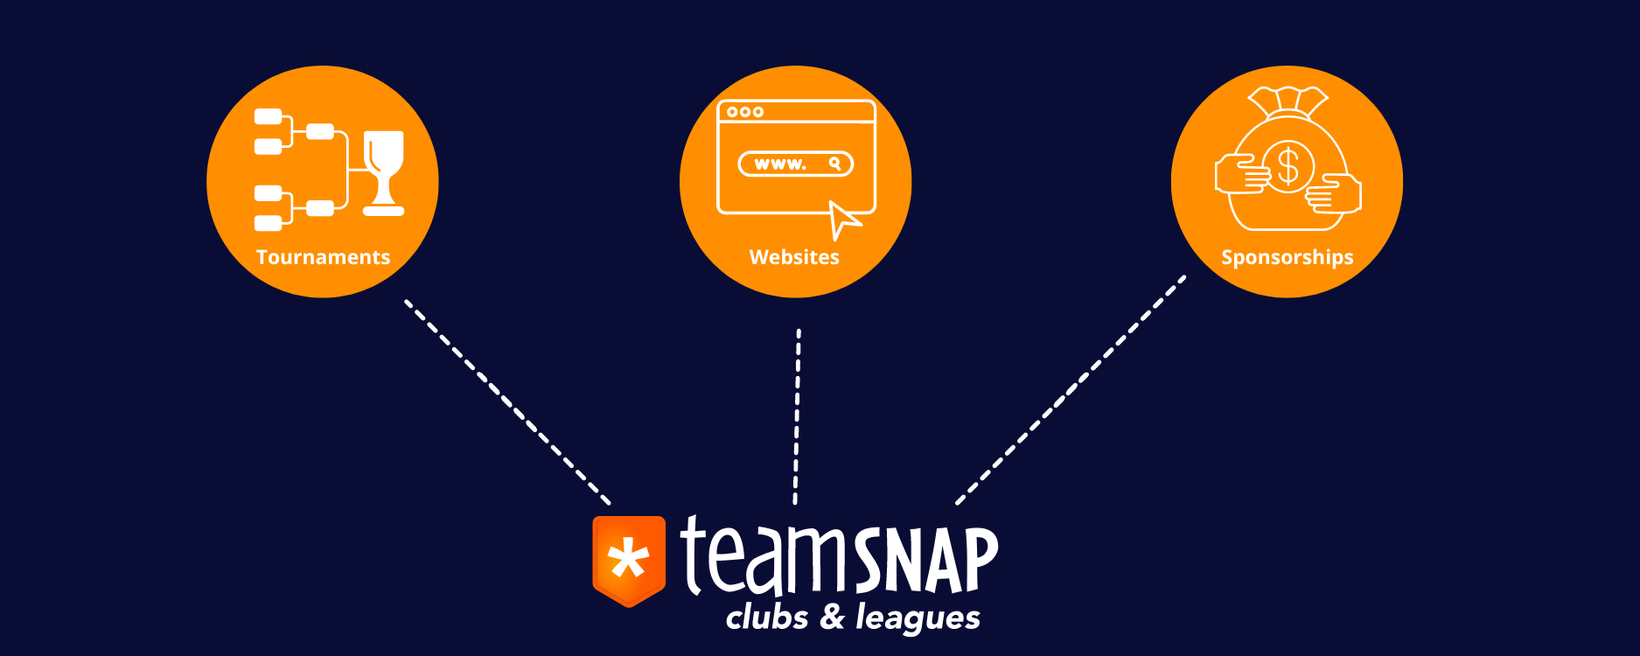 TeamSnap Tournaments - Apps on Google Play